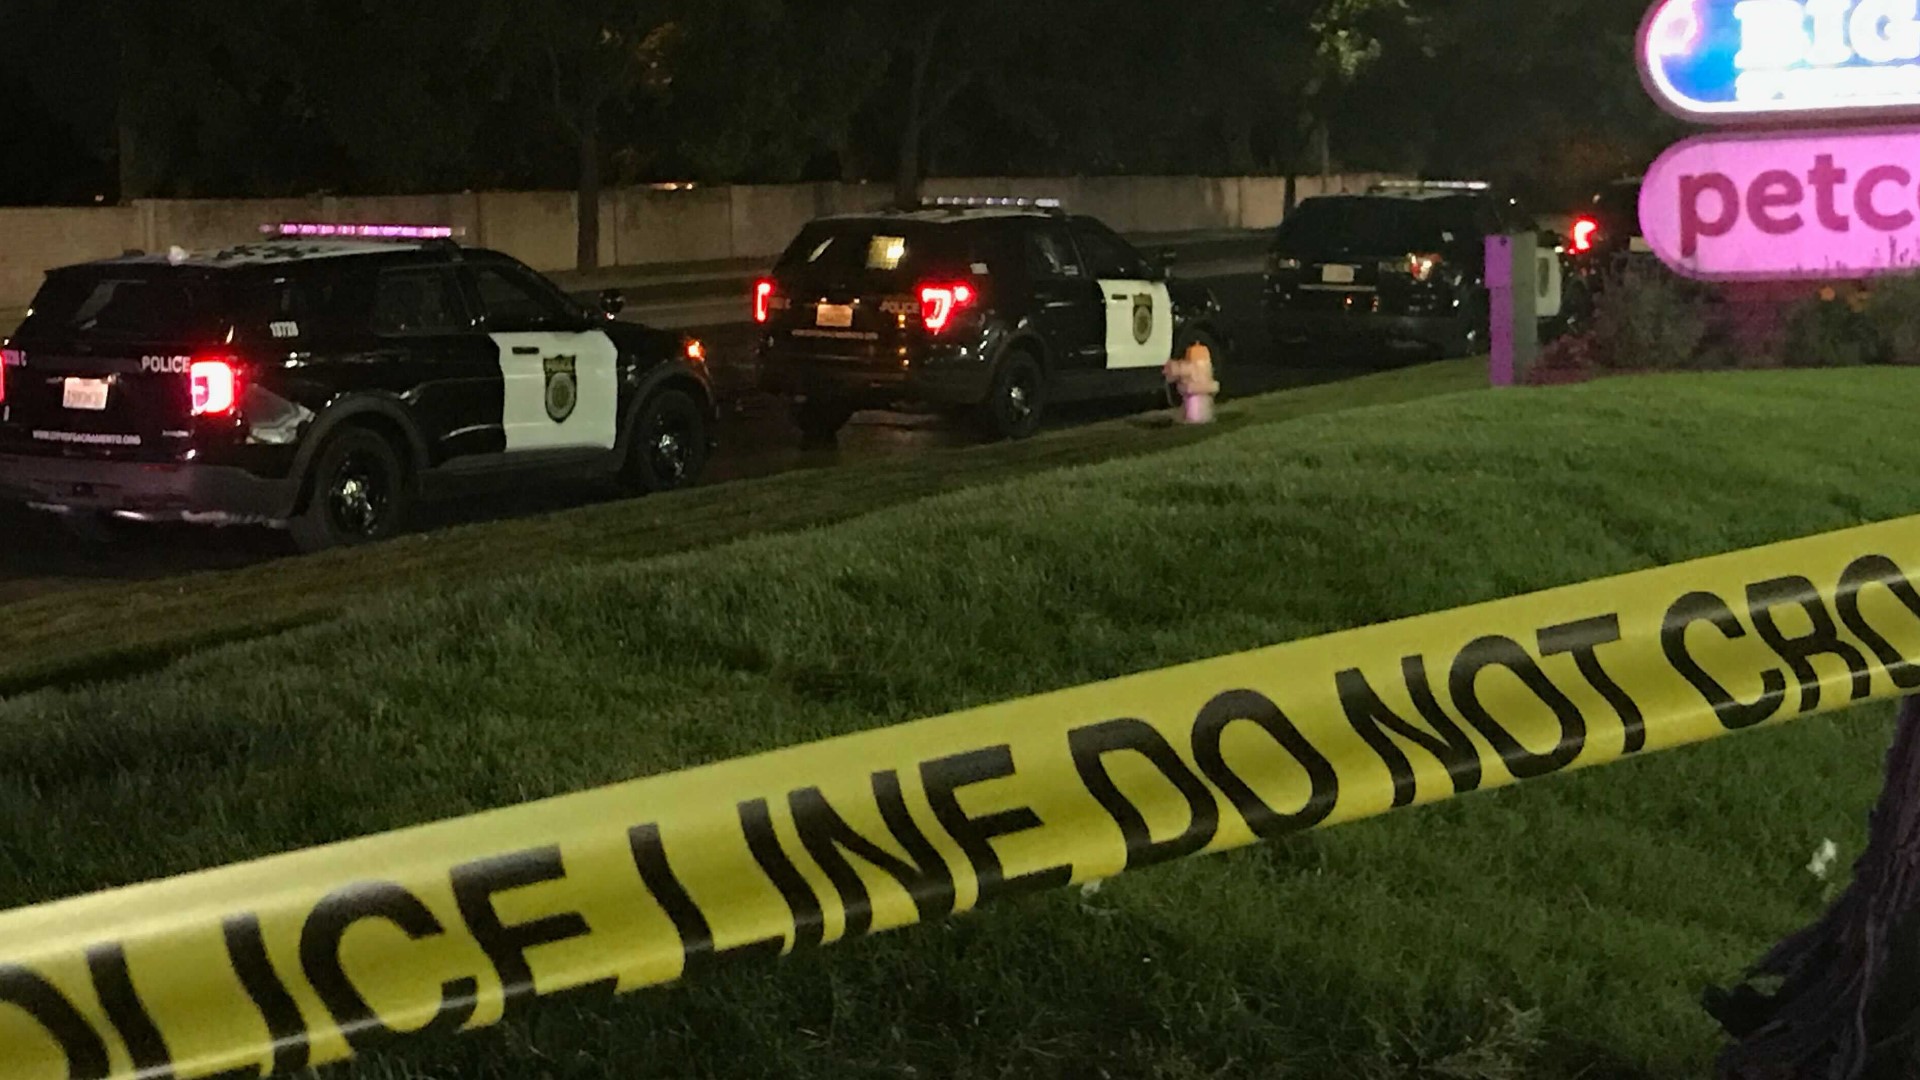 Sacramento Police Department is looking for answers after a shooting unfolded in parking lot Wednesday night.